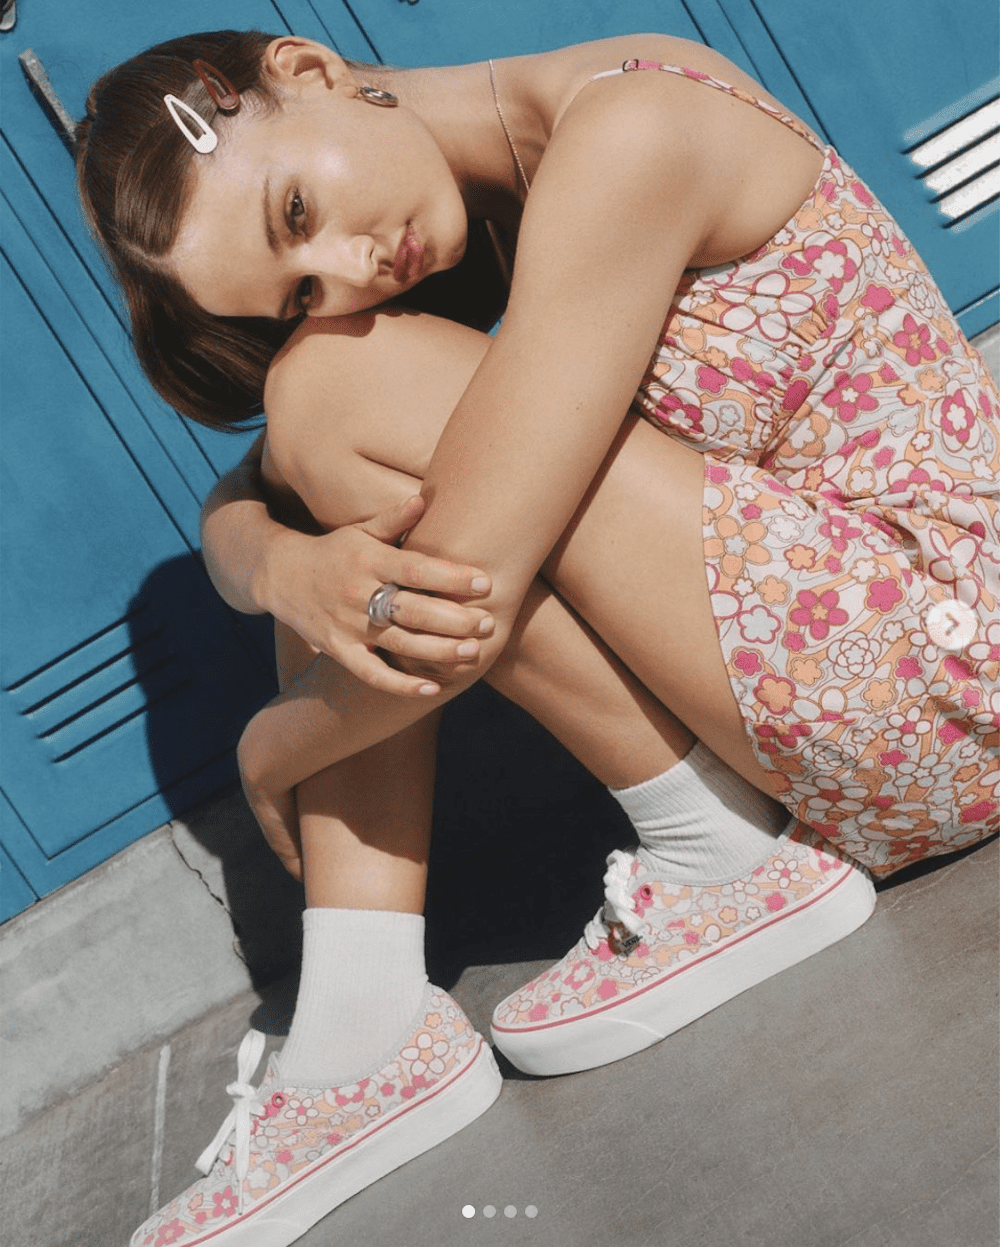 image of a teenage girl wearing a floral dress and matching floral pattern shoes sitting crouched in front of blue lockers